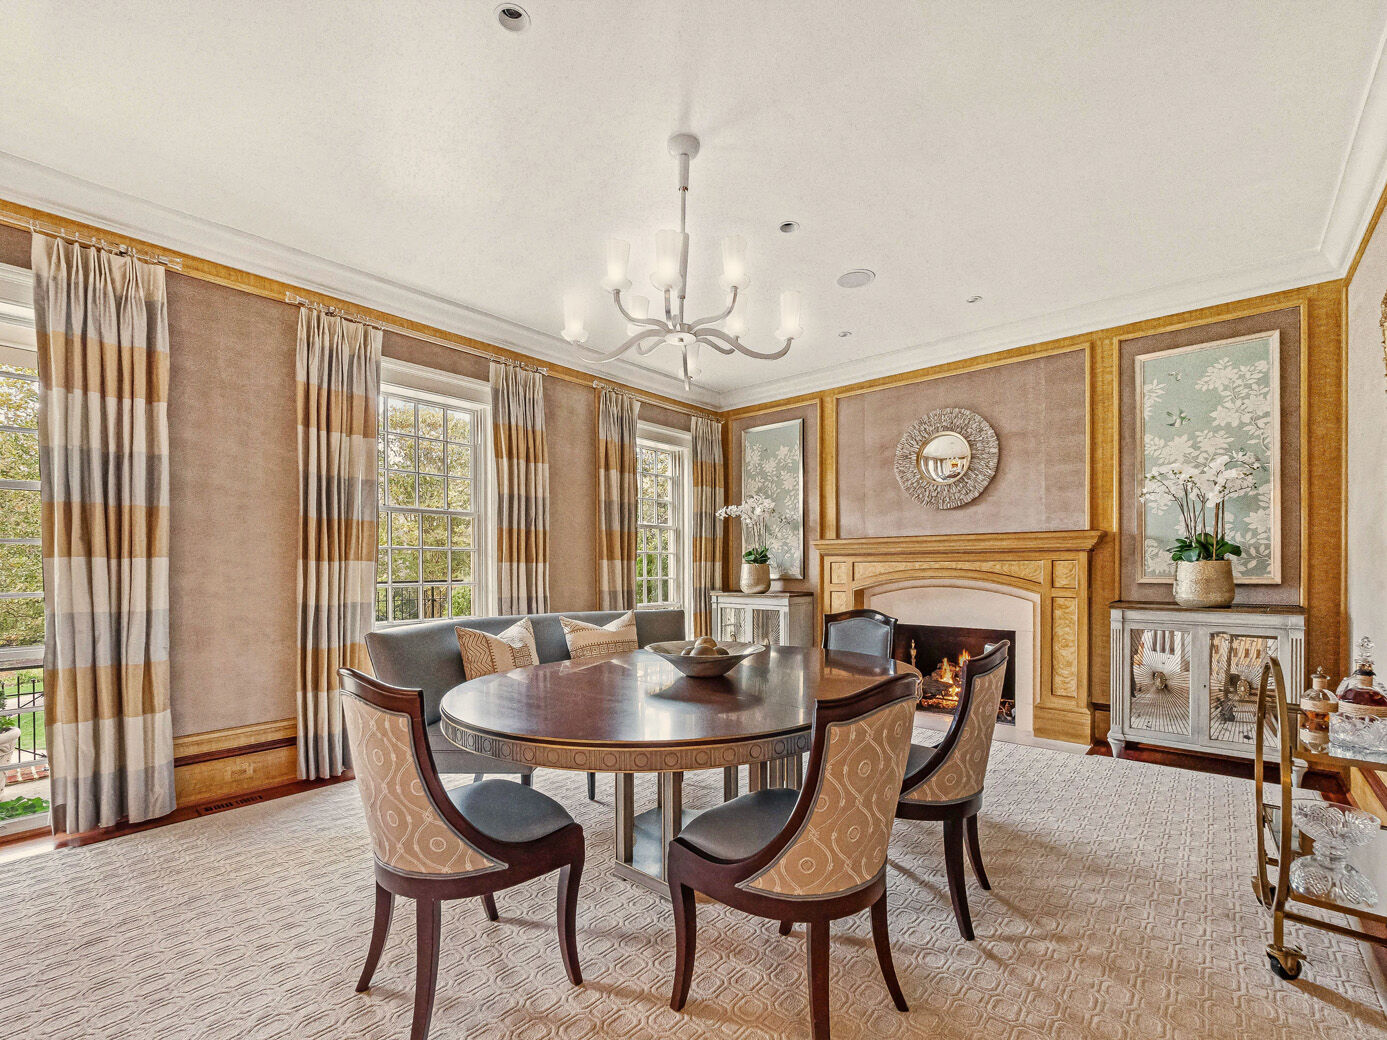 PHOTOS: DC sports magnate Ted Leonsis' $14.7 million former McLean